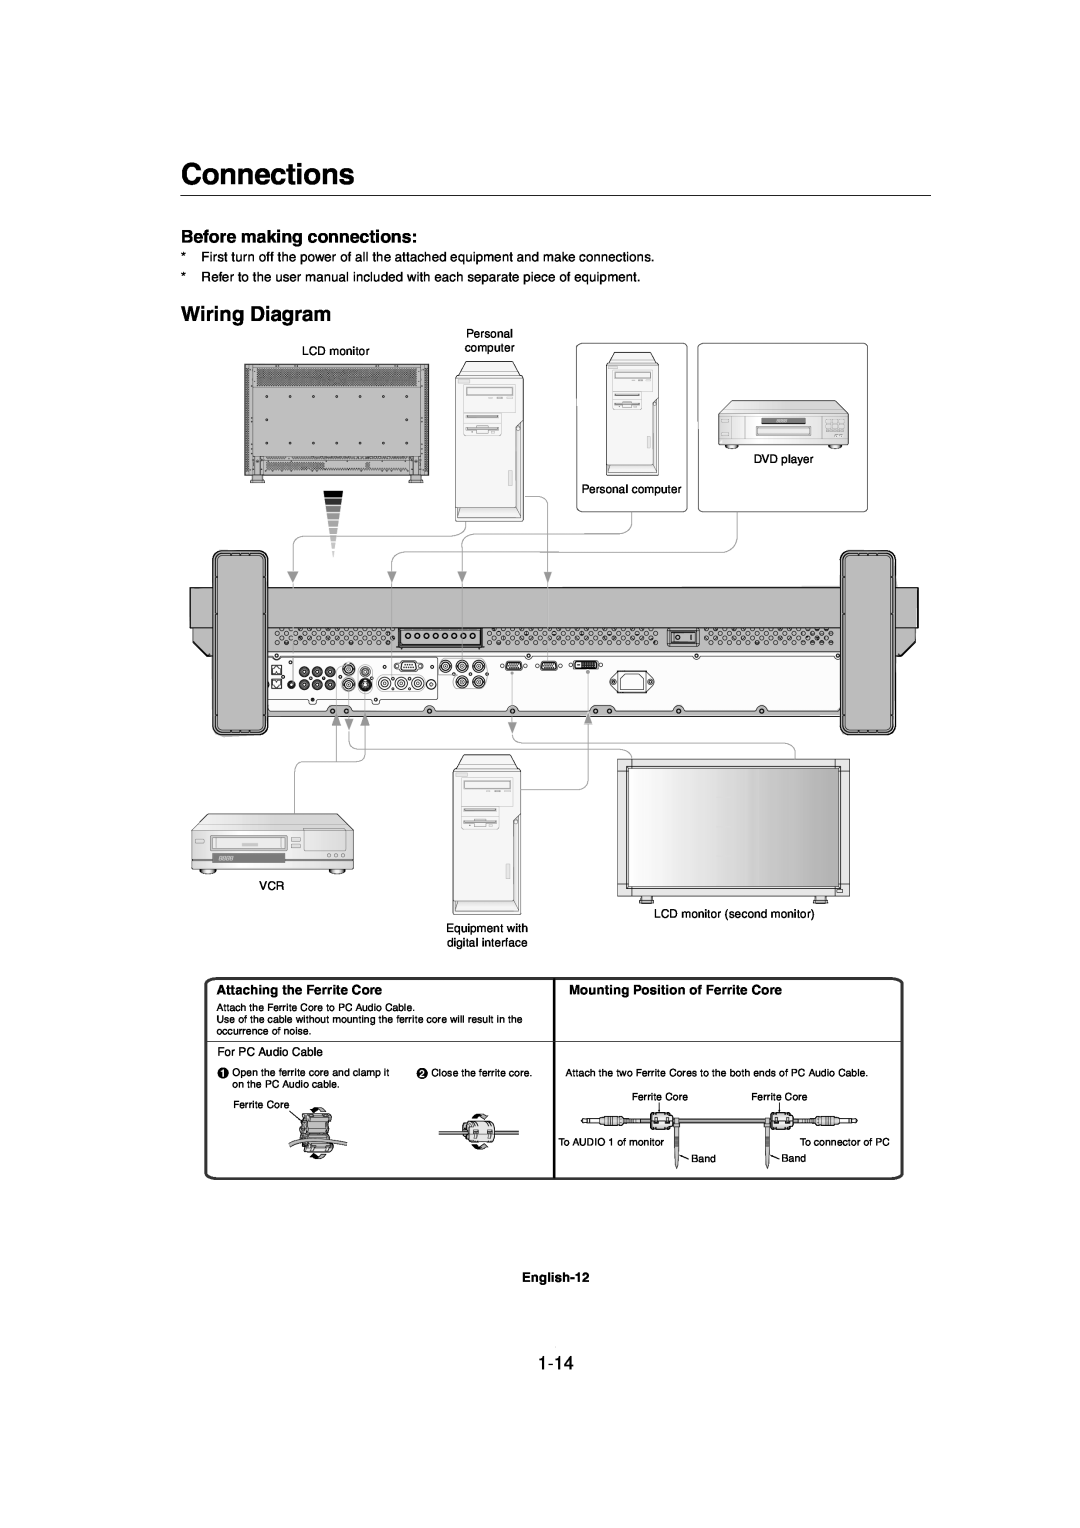 Mitsubishi Electronics MDT321S user manual Connections, Wiring Diagram, Before making connections, 1-14 